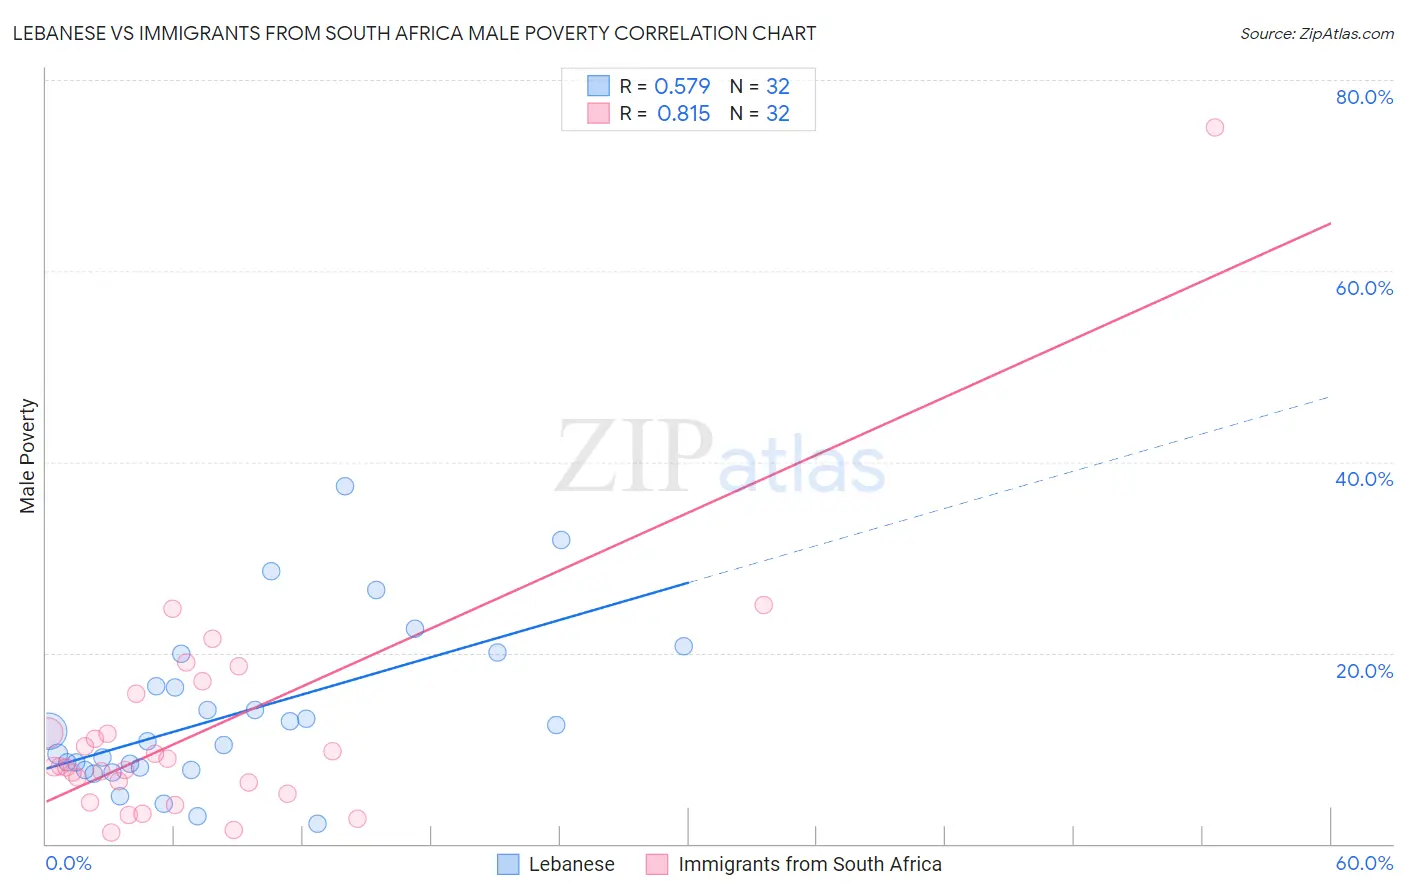 Lebanese vs Immigrants from South Africa Male Poverty